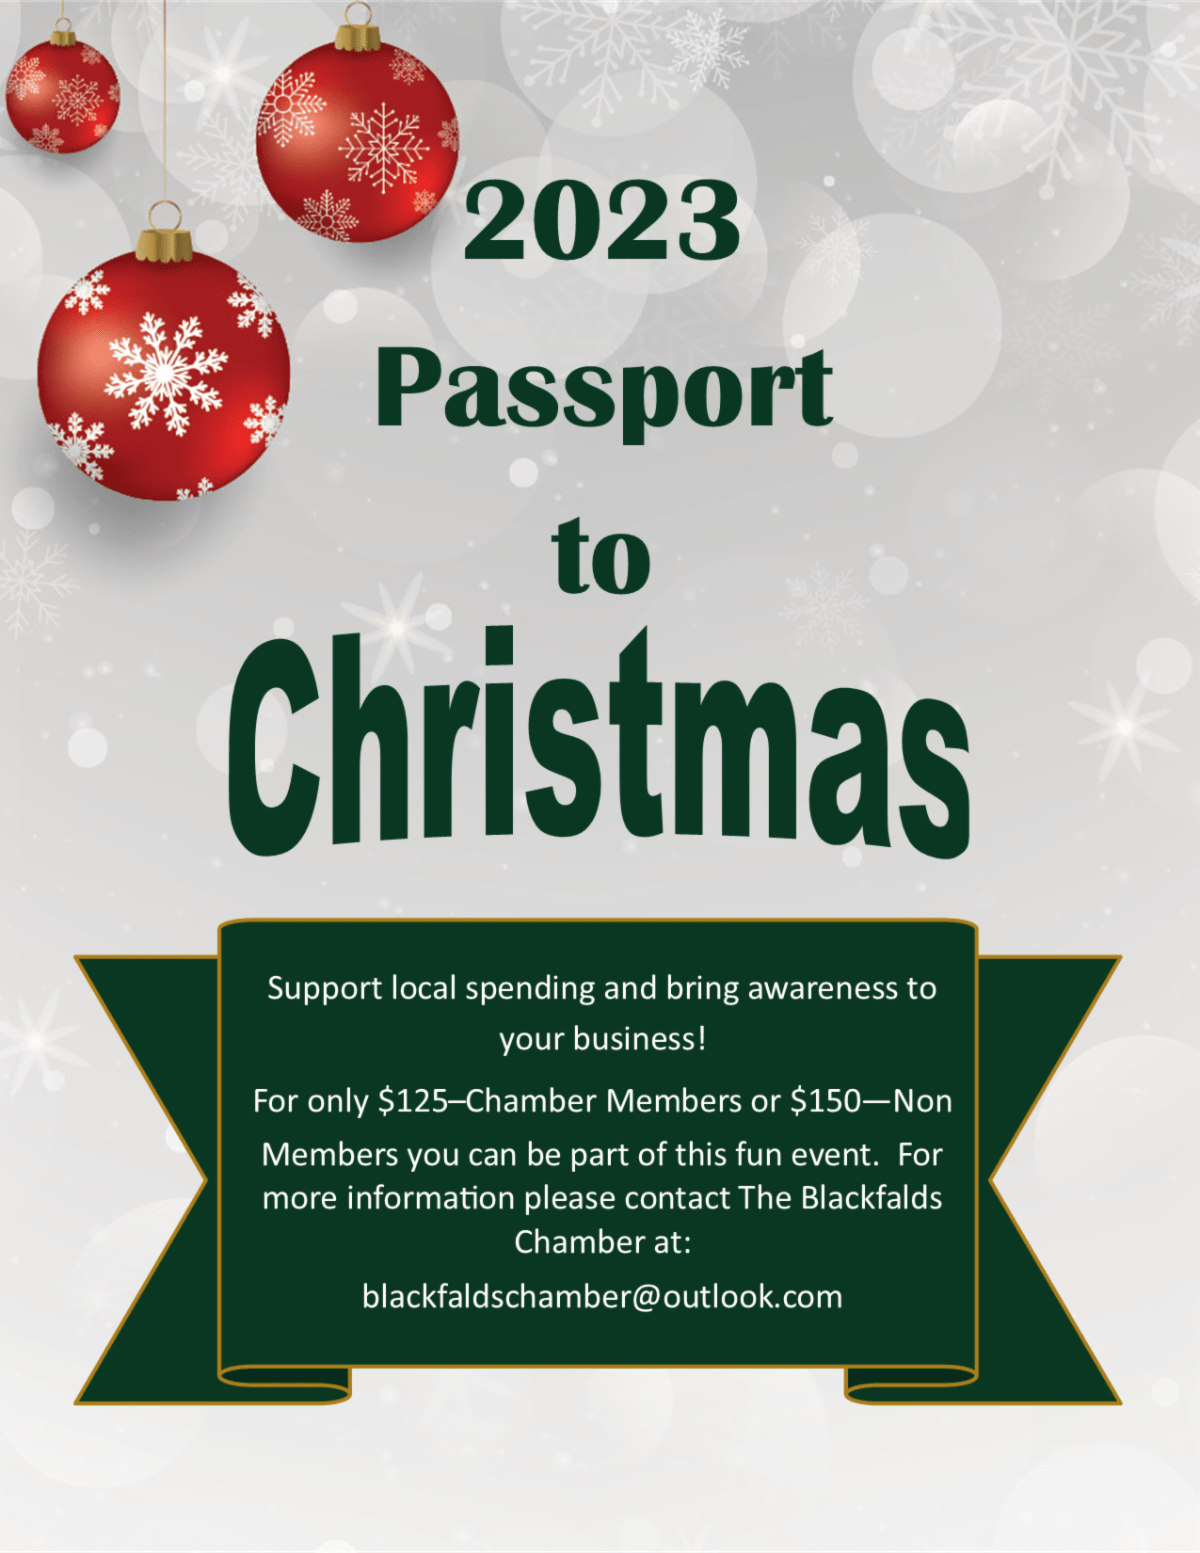 Passport to Christmas results for 2022